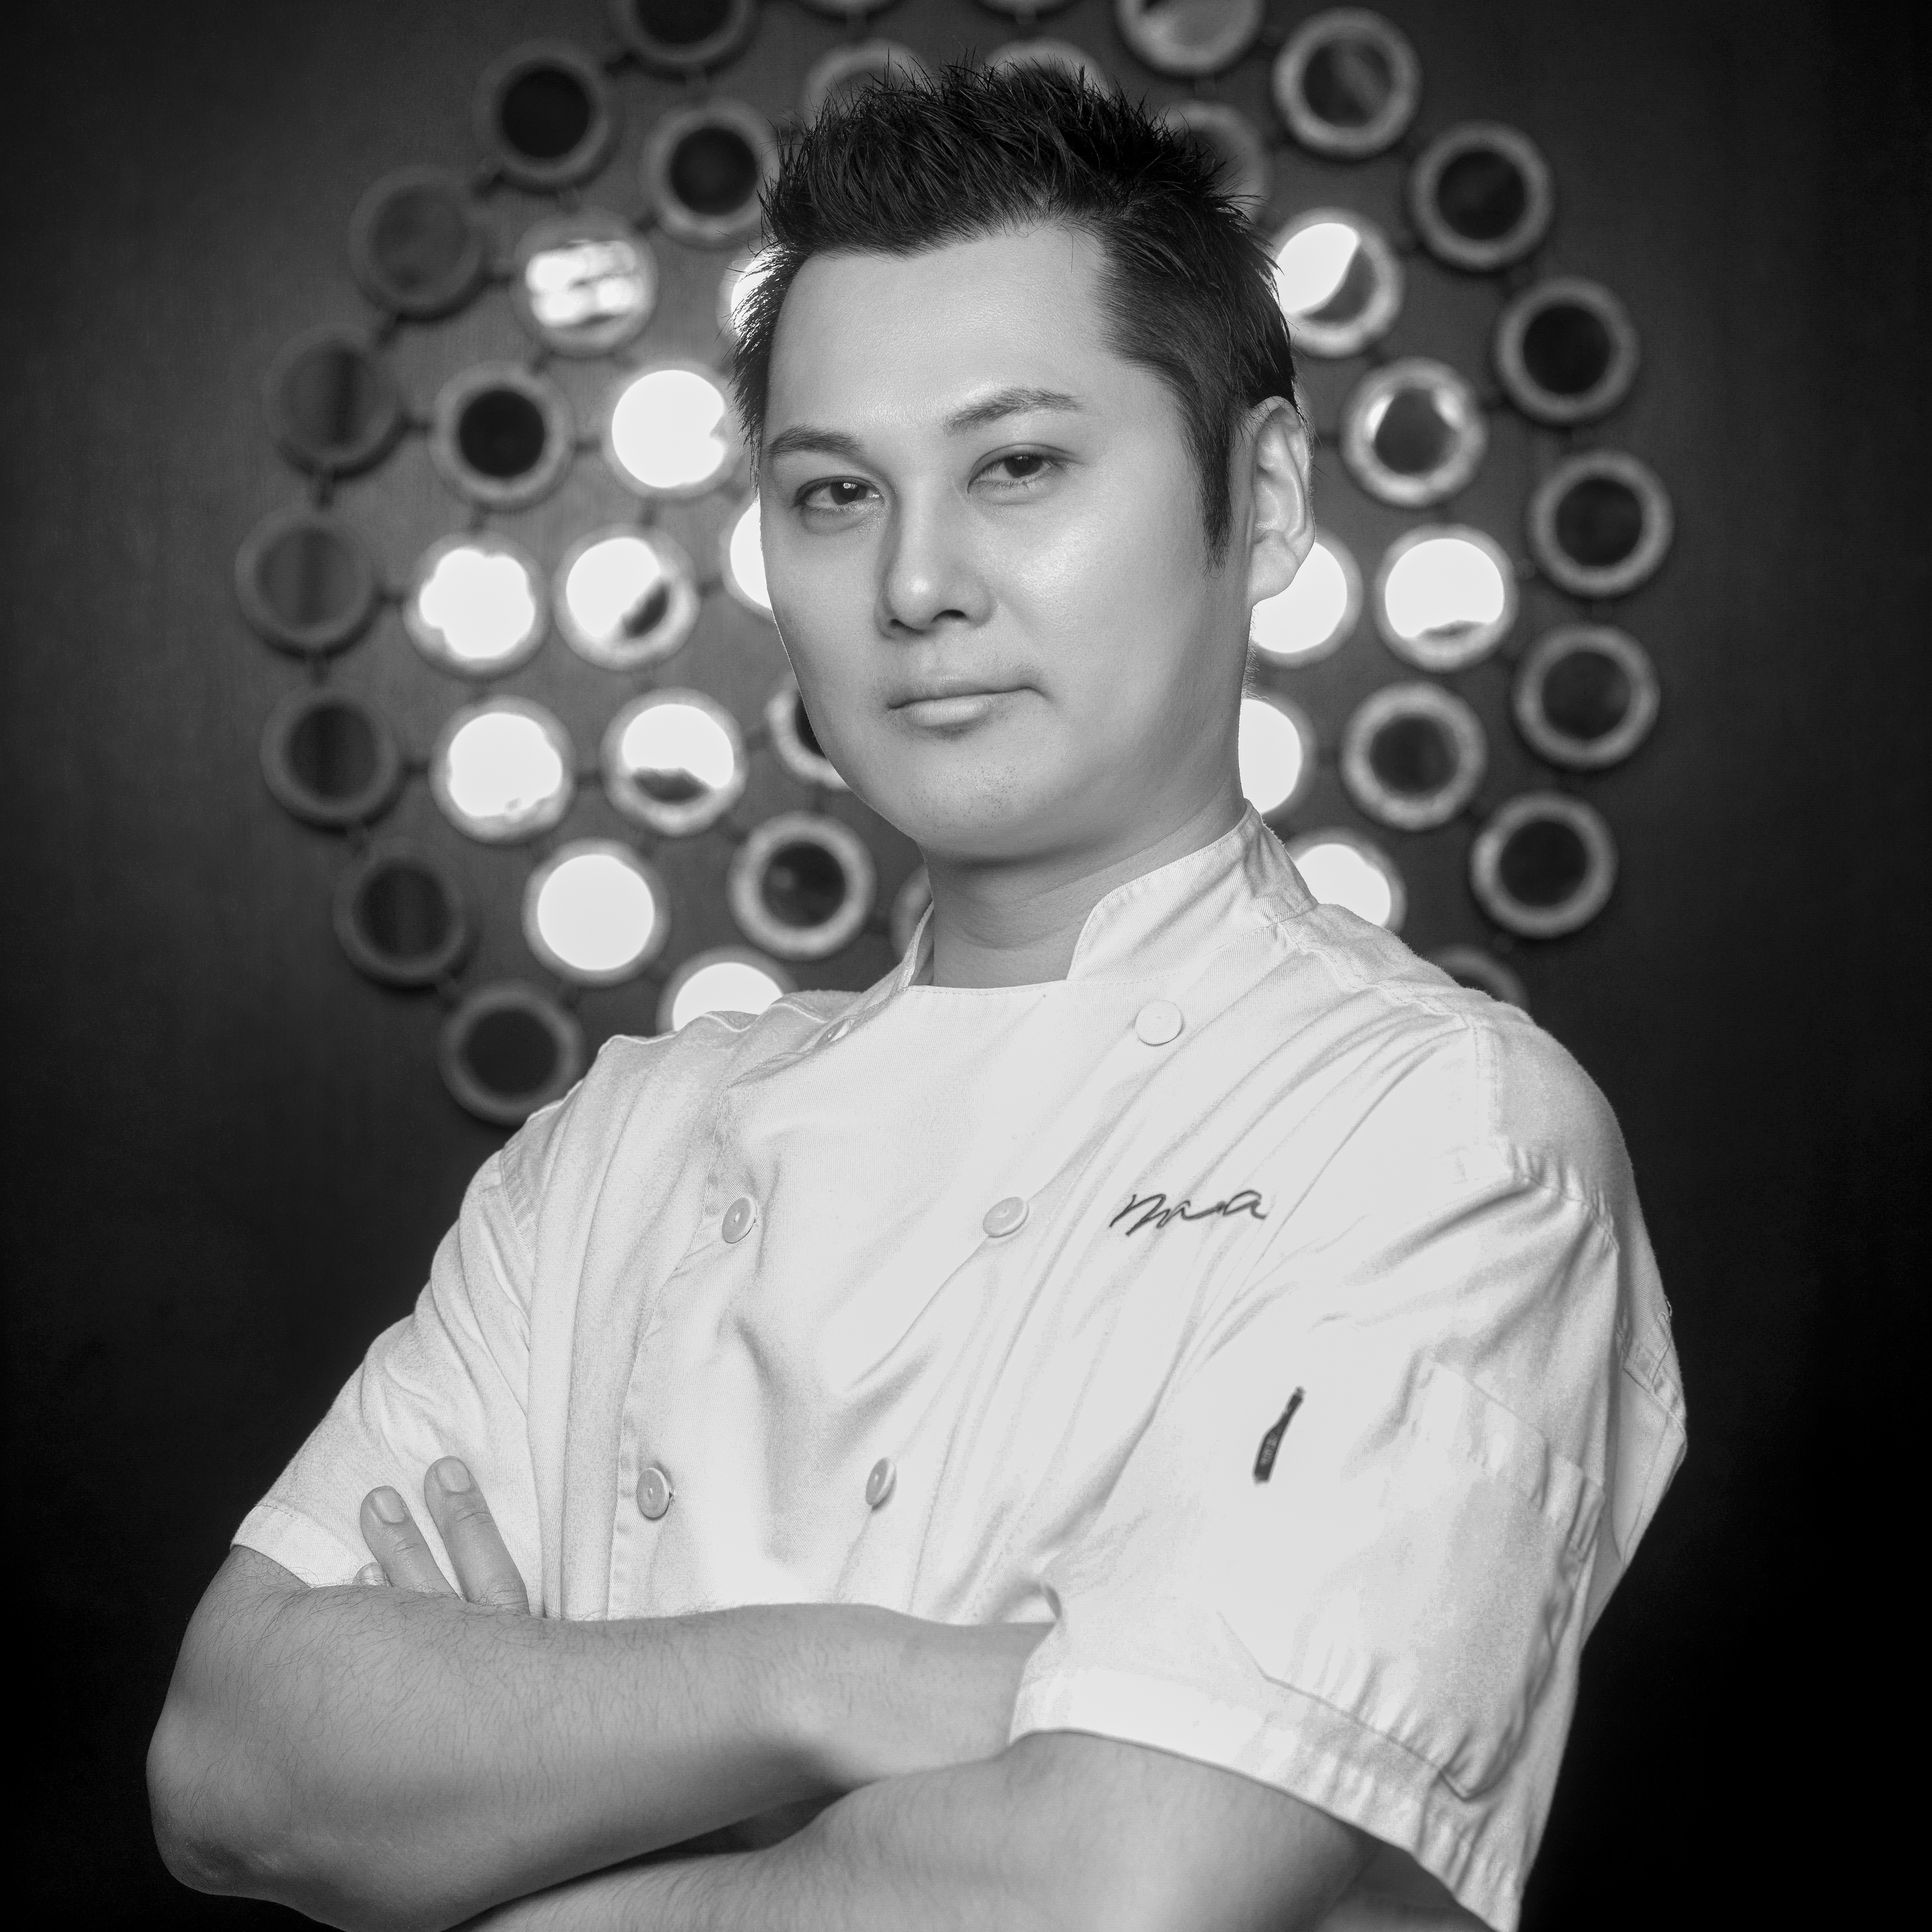 headshot of a man in a chef's coat